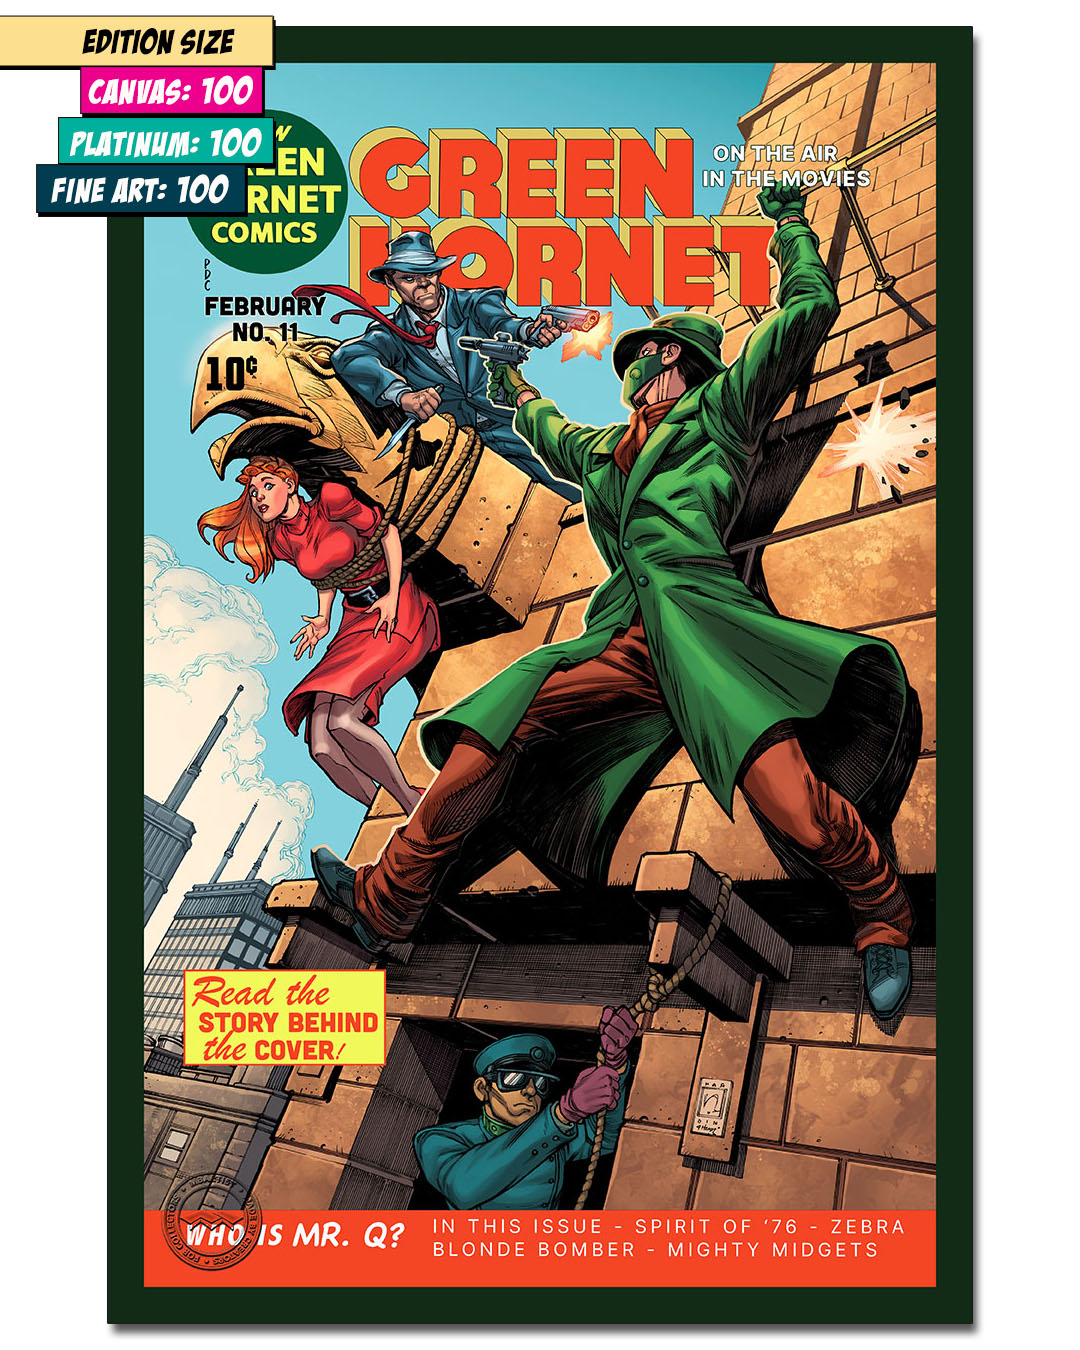 GREEN HORNET #11: OUT ON A LEDGE